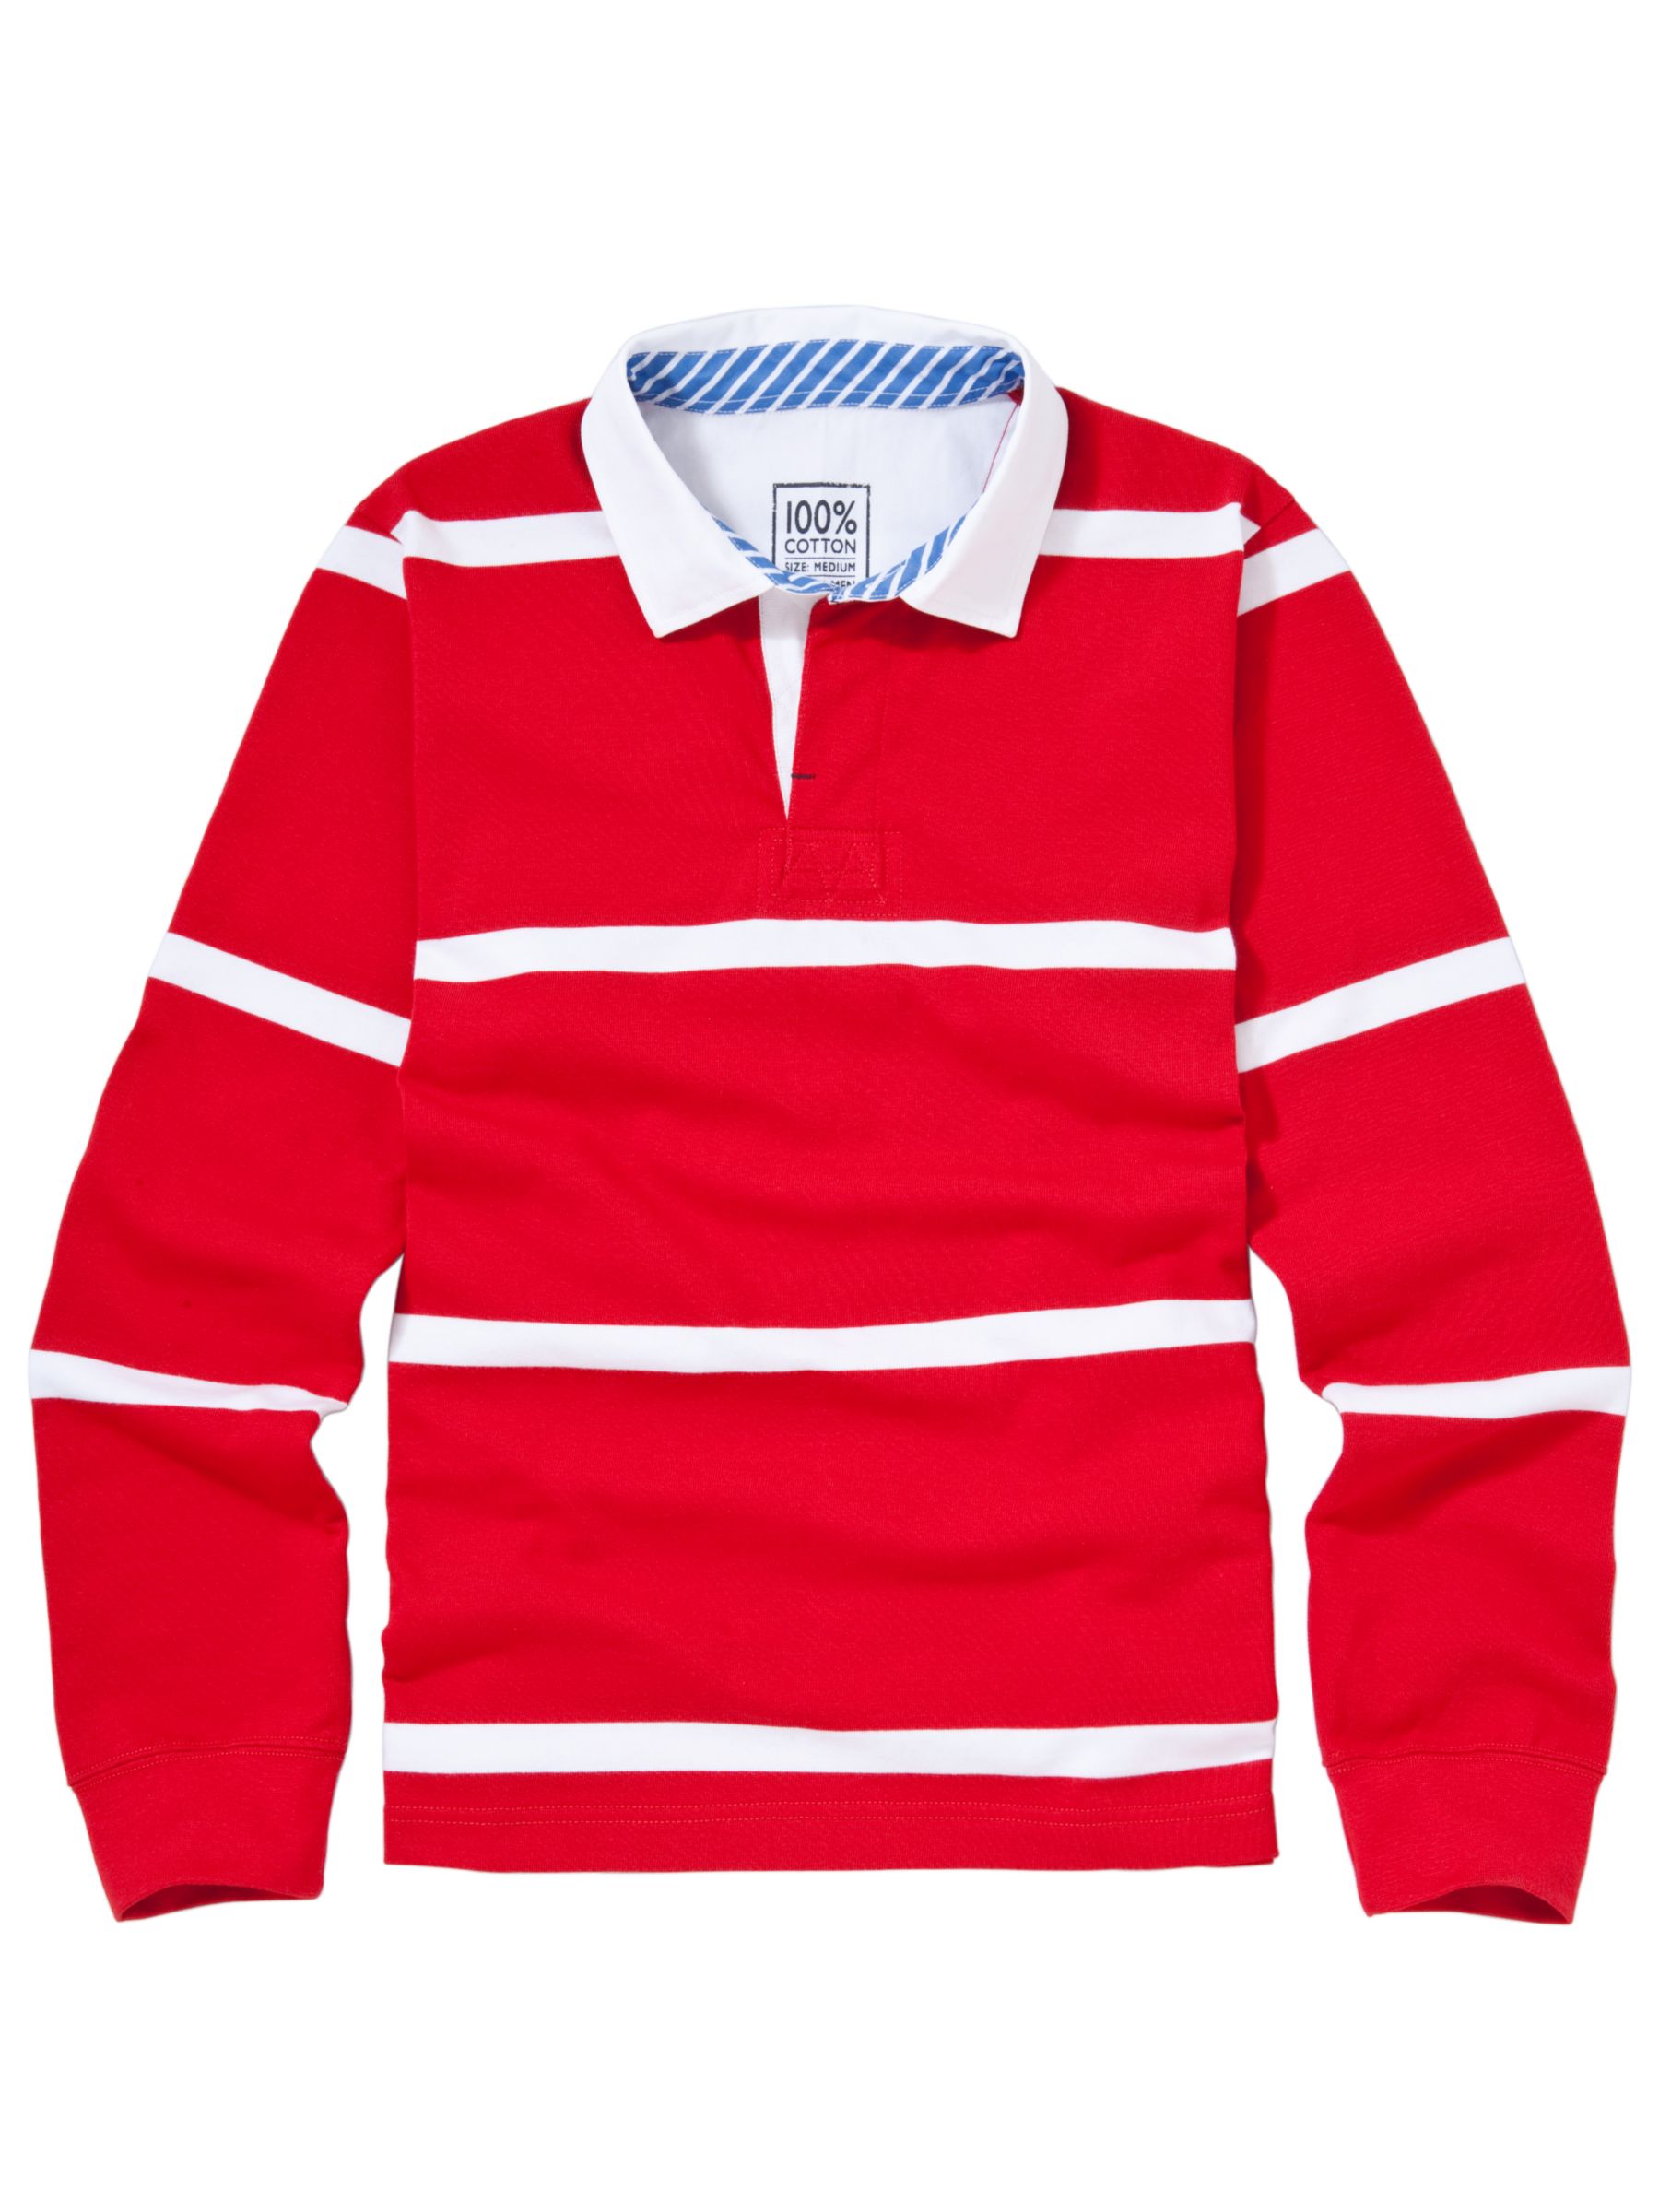 Single Stripe Rugby Shirt, Red